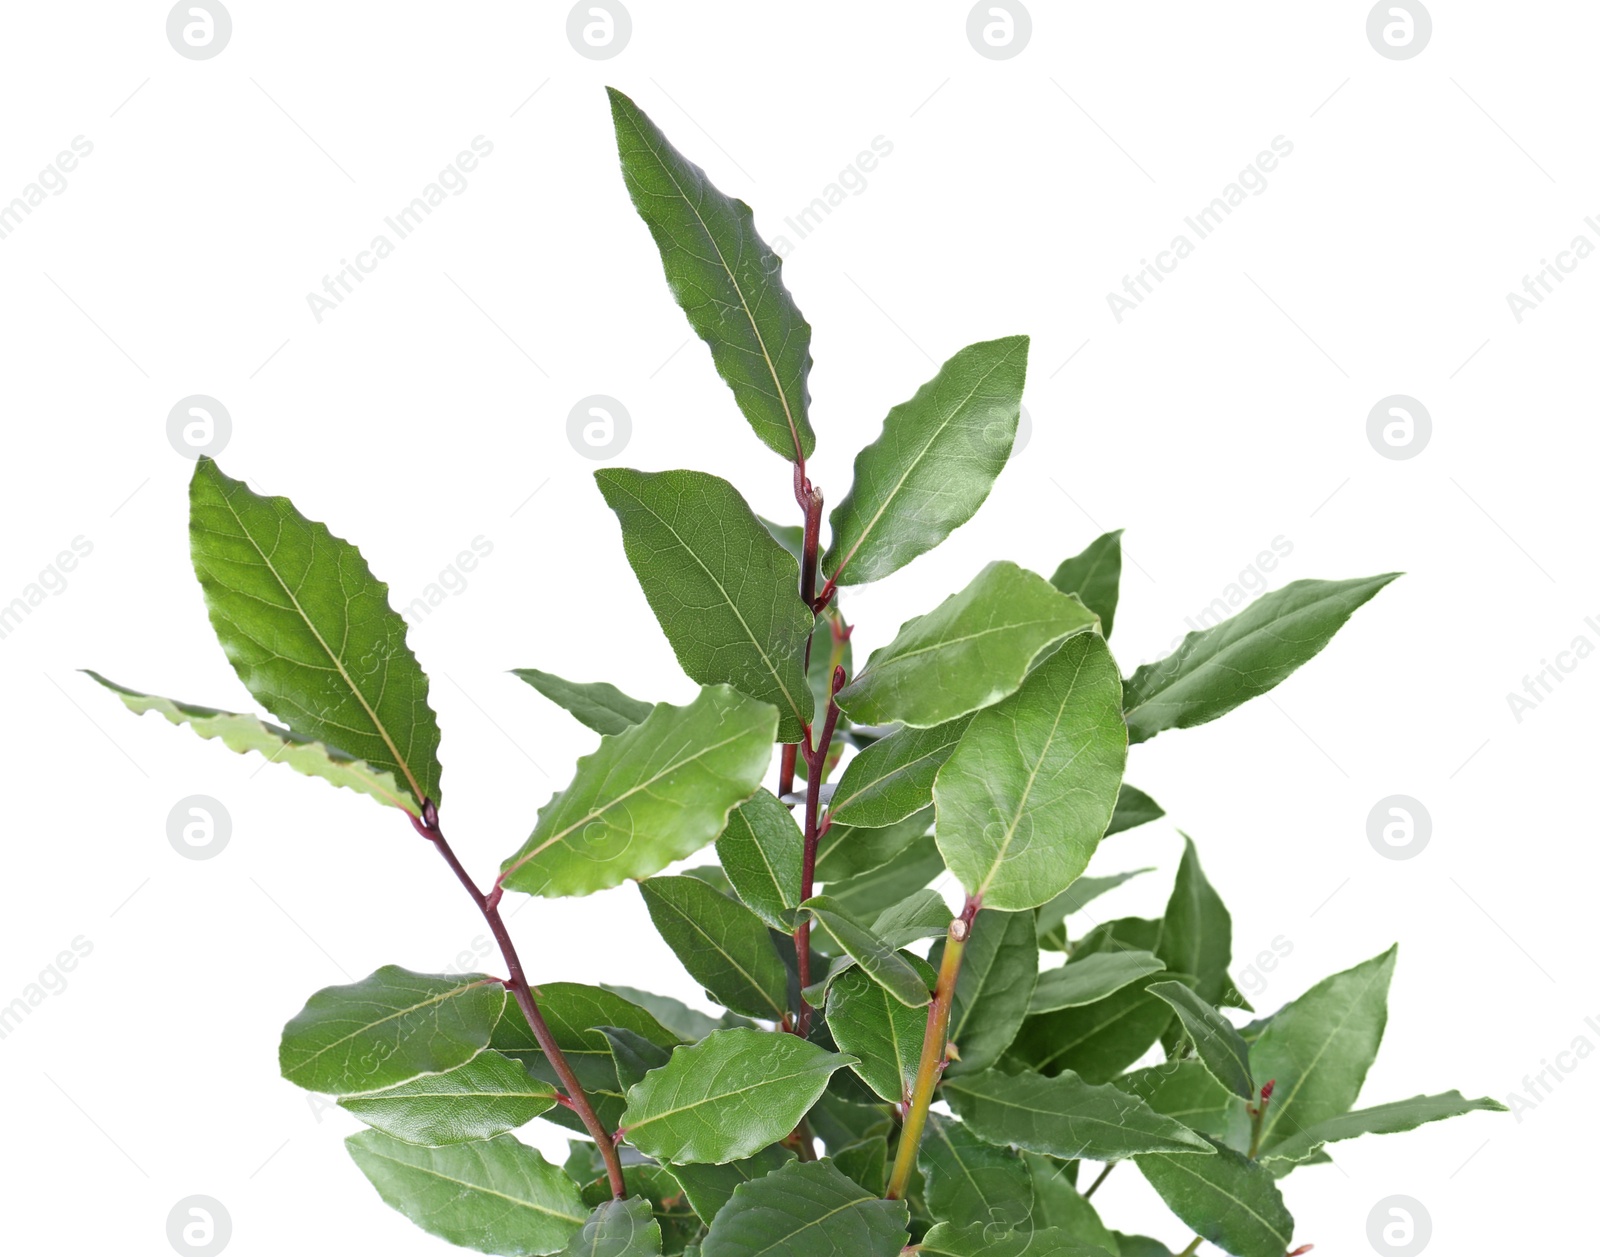 Photo of Branches with bay leaves isolated on white